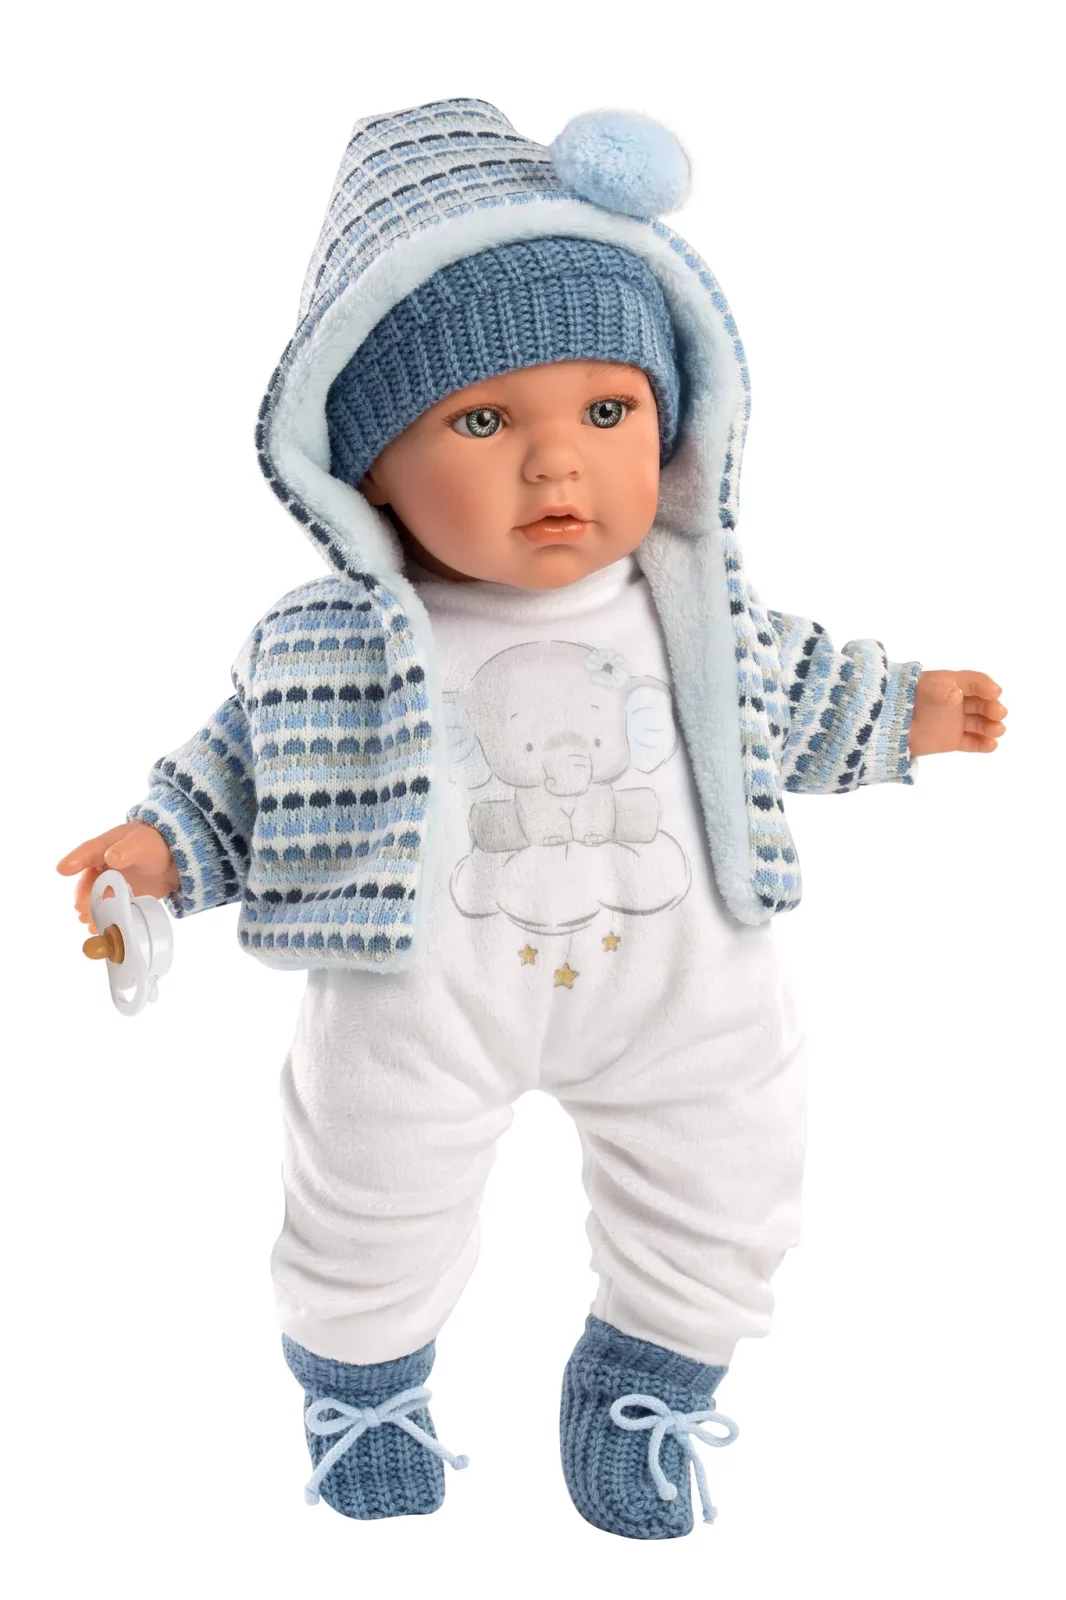 Enzo 16.5 Soft Body Crying Baby Doll